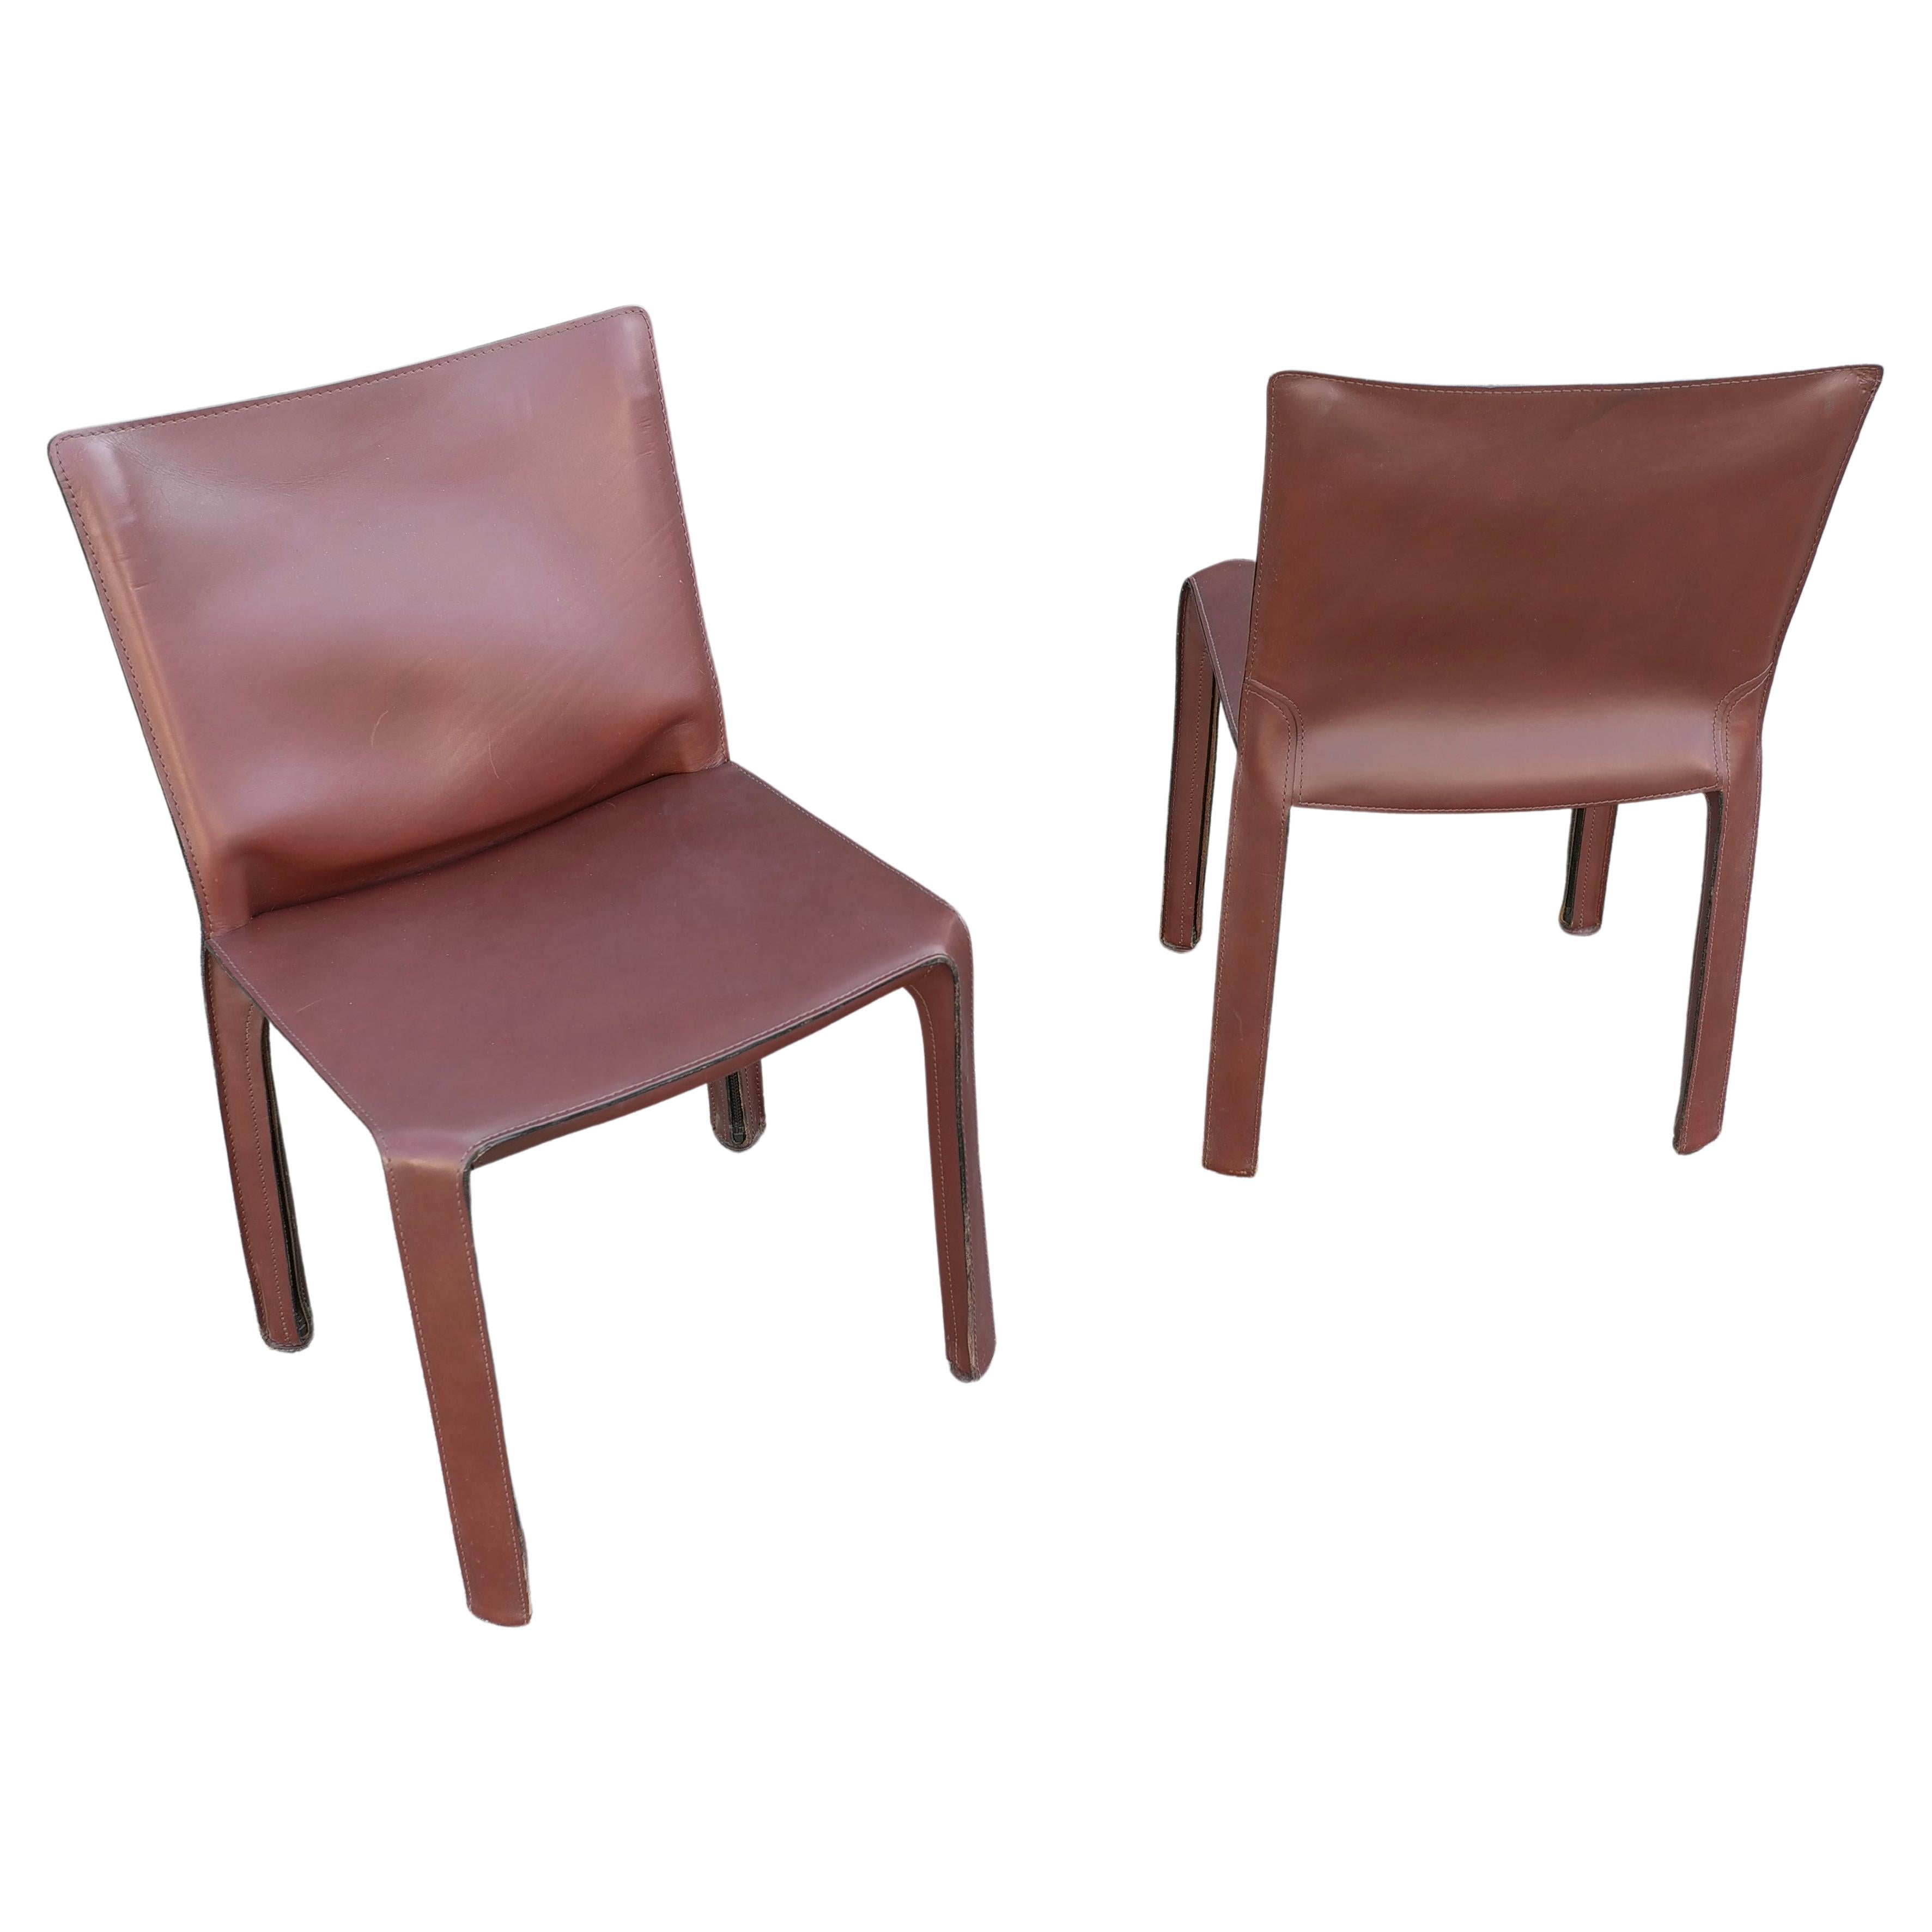 Mid-Century Modern Pair of Chestnut Colored Cab Dining Chairs by Mario Bellini for Cassina For Sale